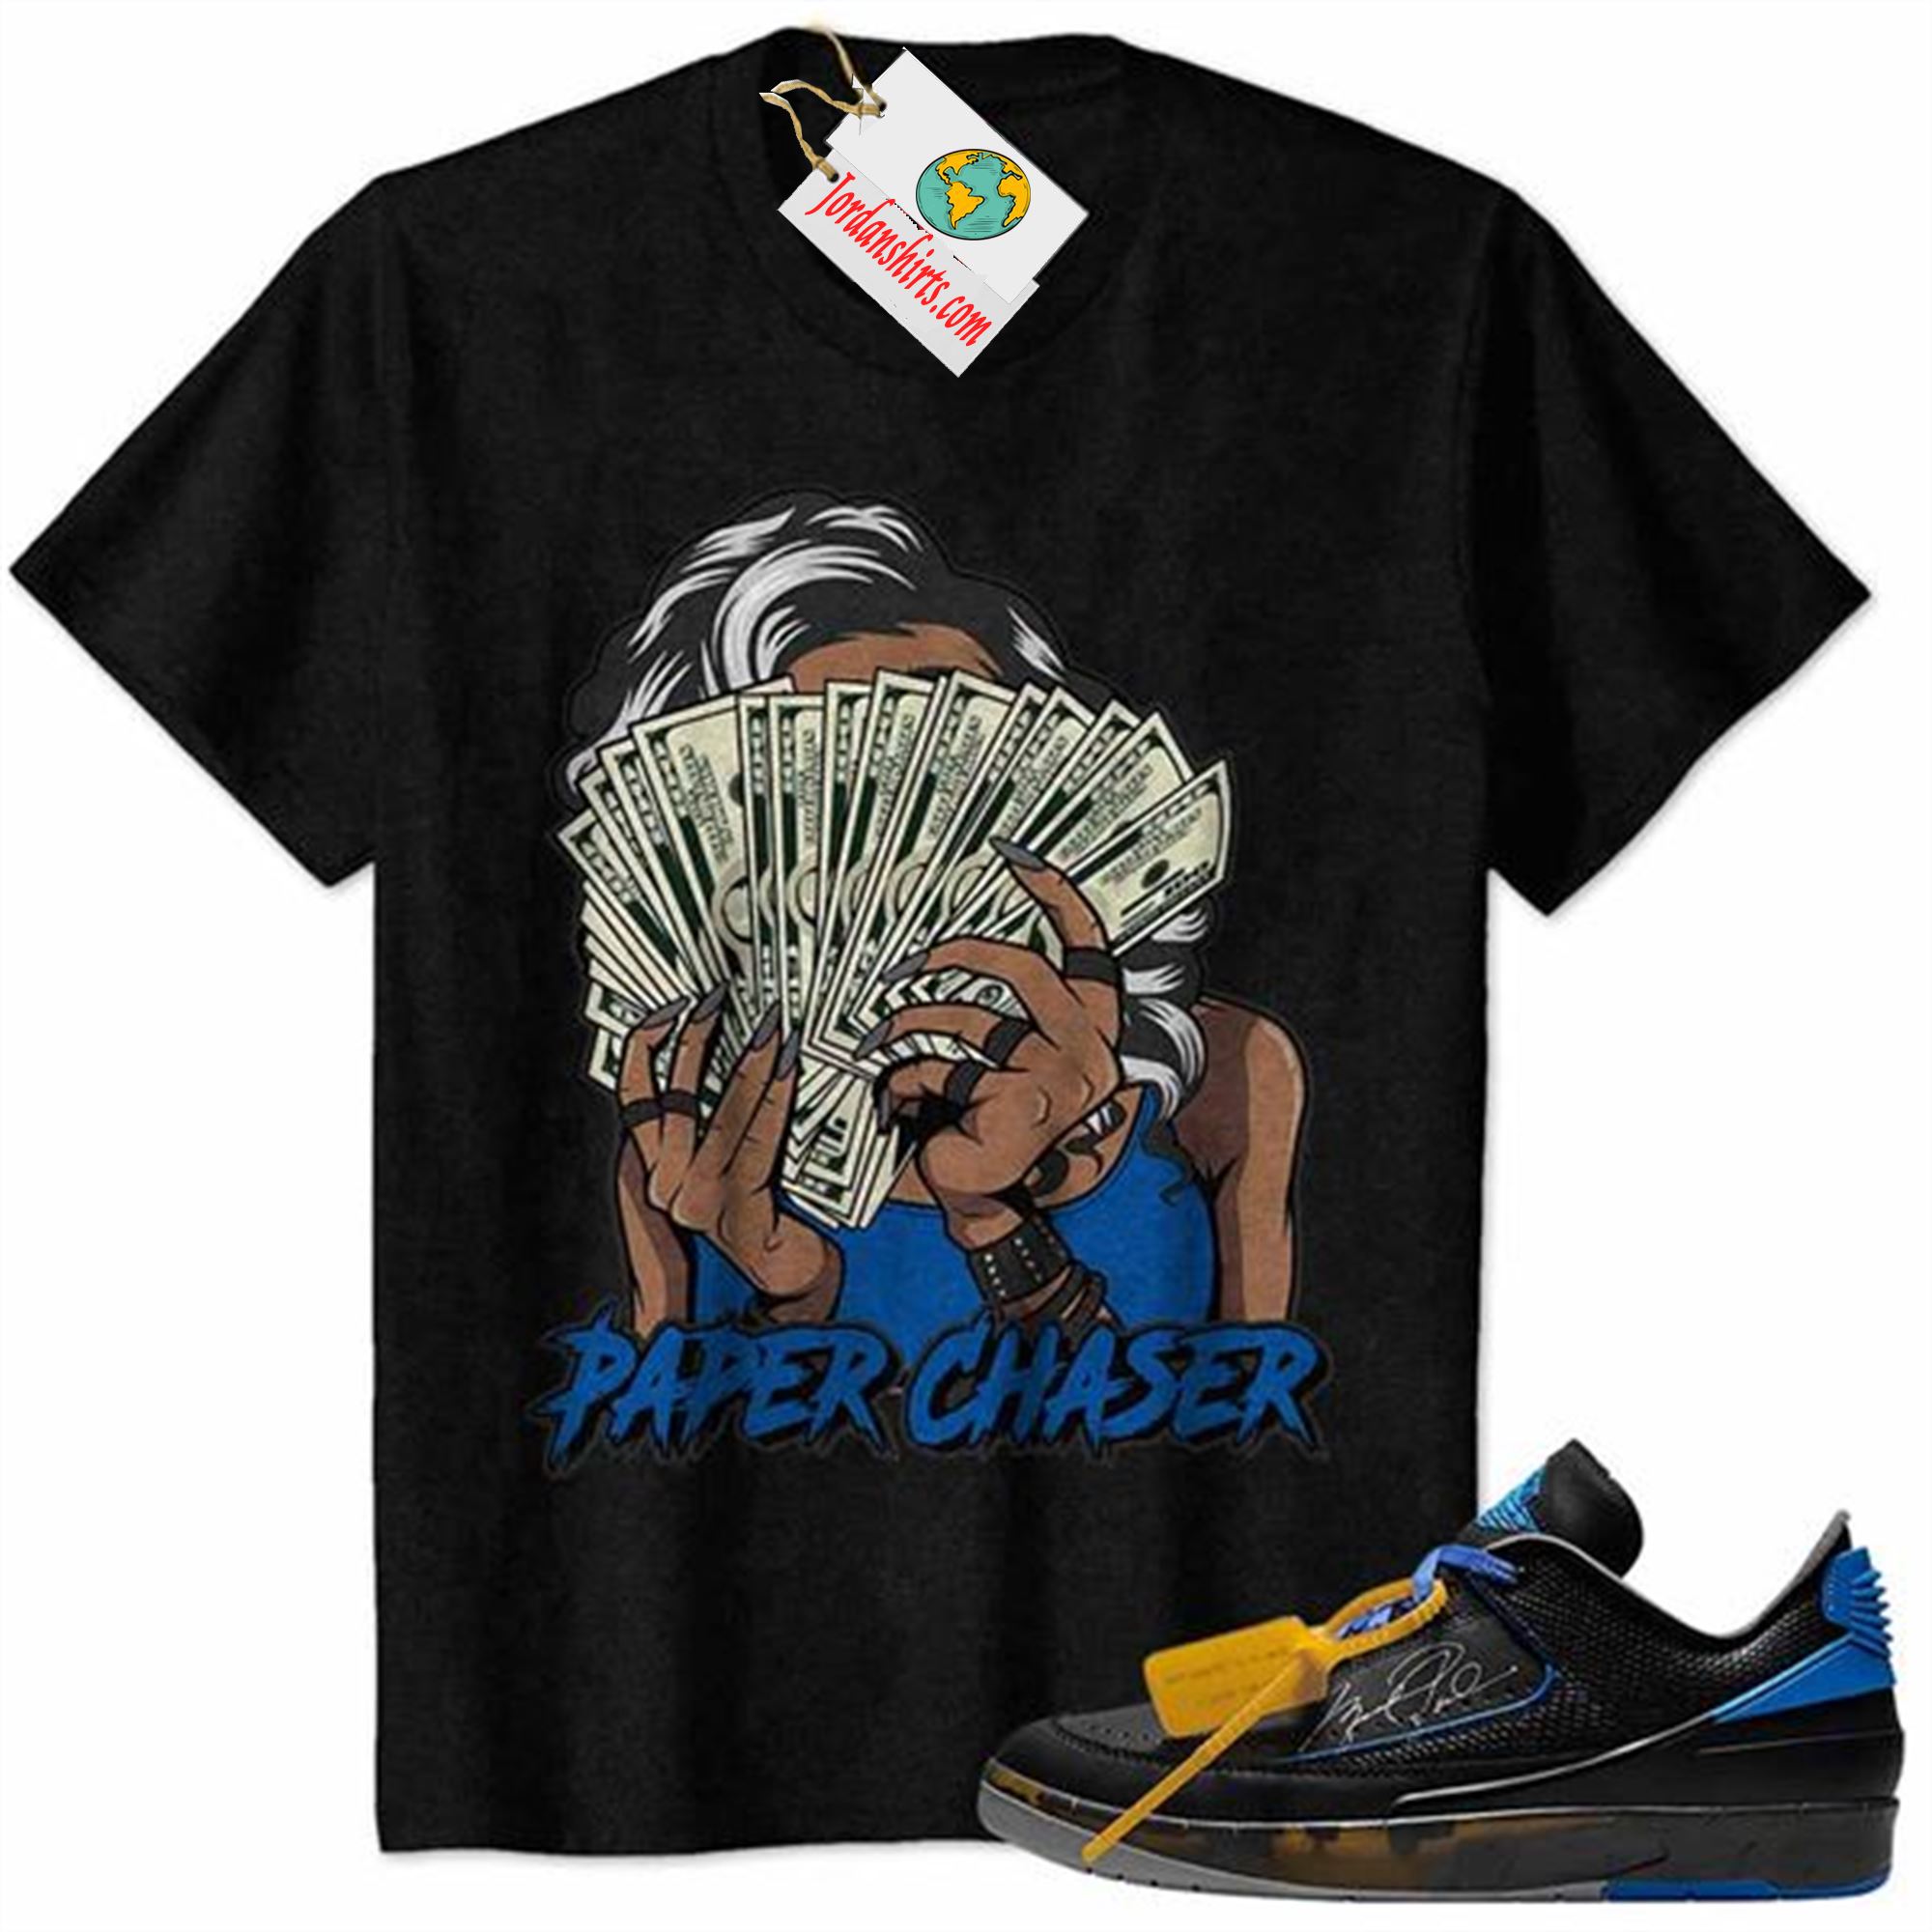 Jordan 2 Shirt, Paper Chaser Business Woman Money Fan Spread Black Air Jordan 2 Low X Off-white Black And Varsity Royal 2s Full Size Up To 5xl